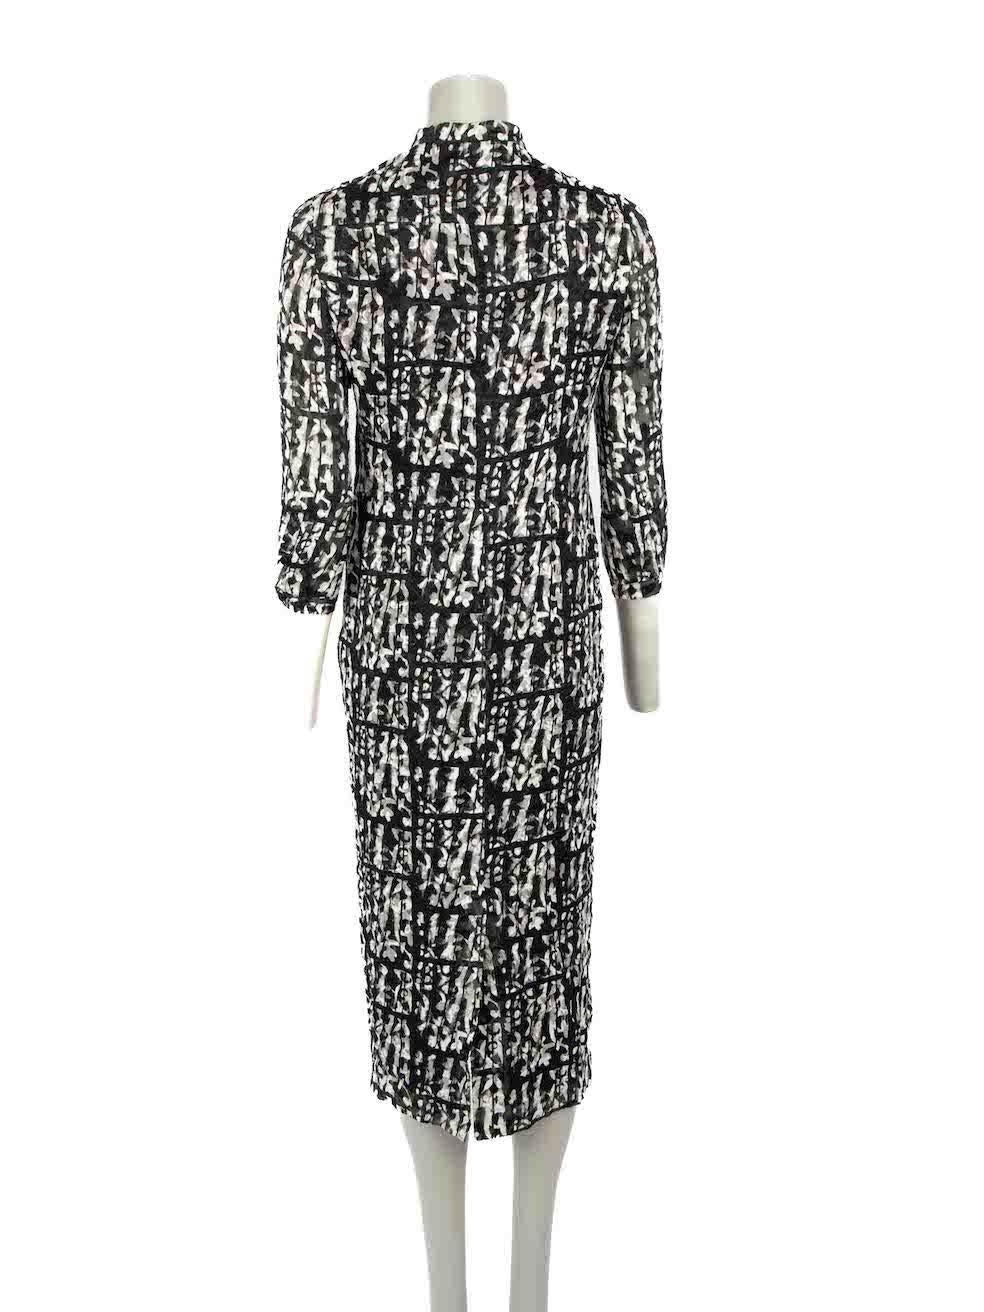 Burberry Black Karla Ablbe Abstract Print Dress Size XS In Excellent Condition For Sale In London, GB